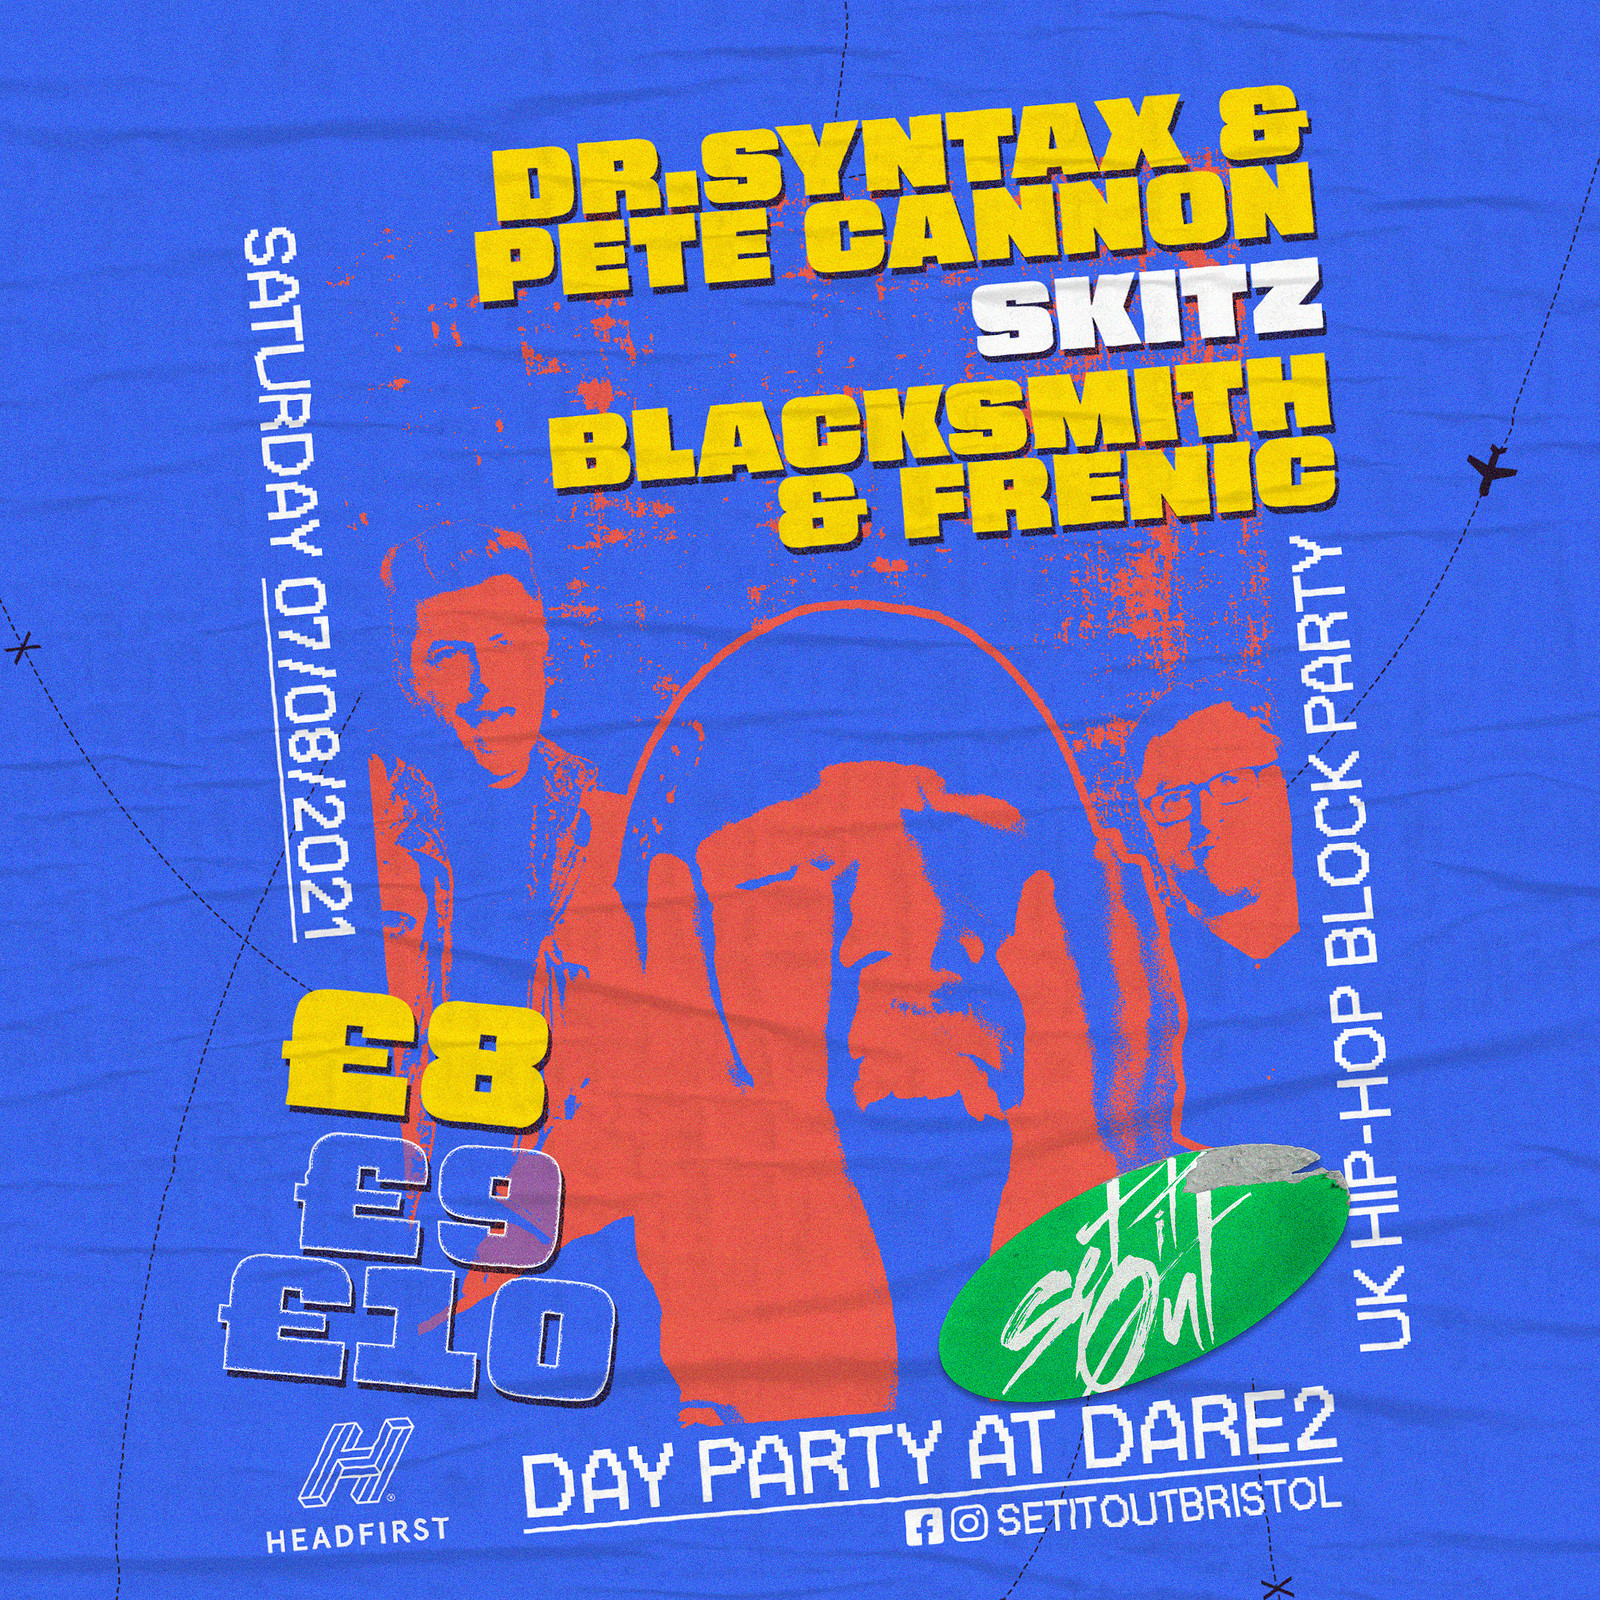 Set It Out: UK Hip Hop Block Party at Dare to Club